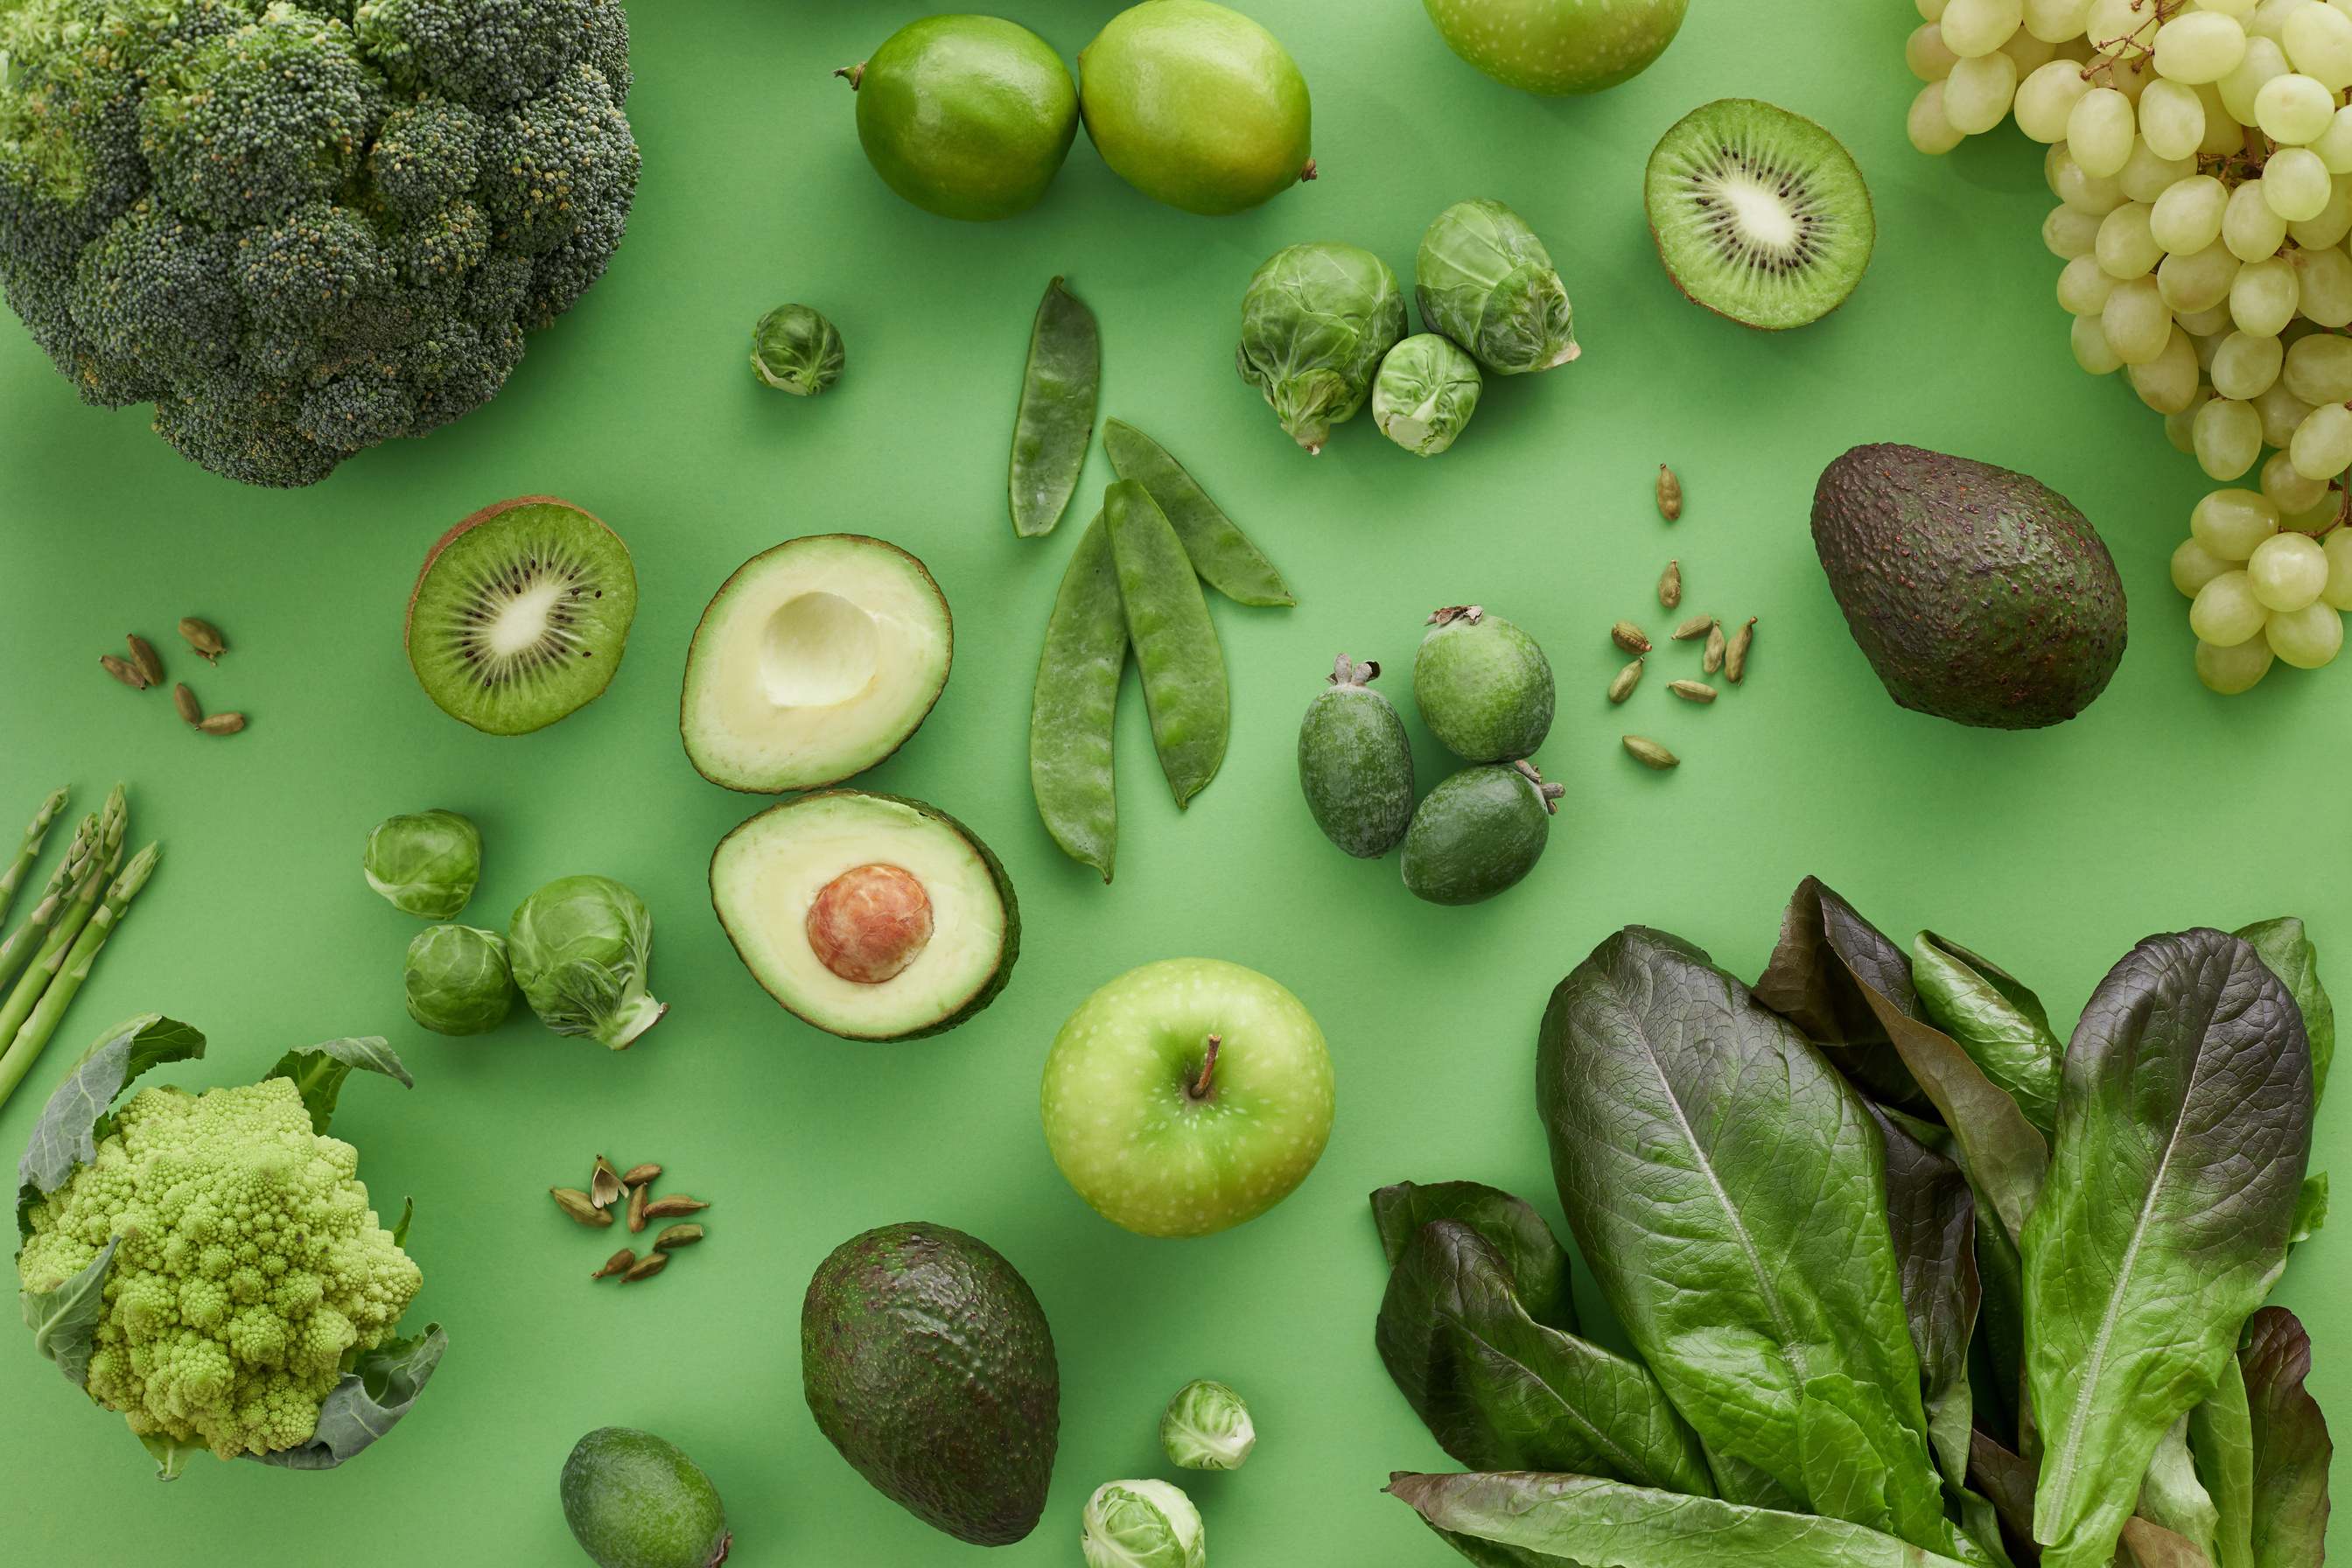 Assorted Vegetables and Fruits on Green Surface